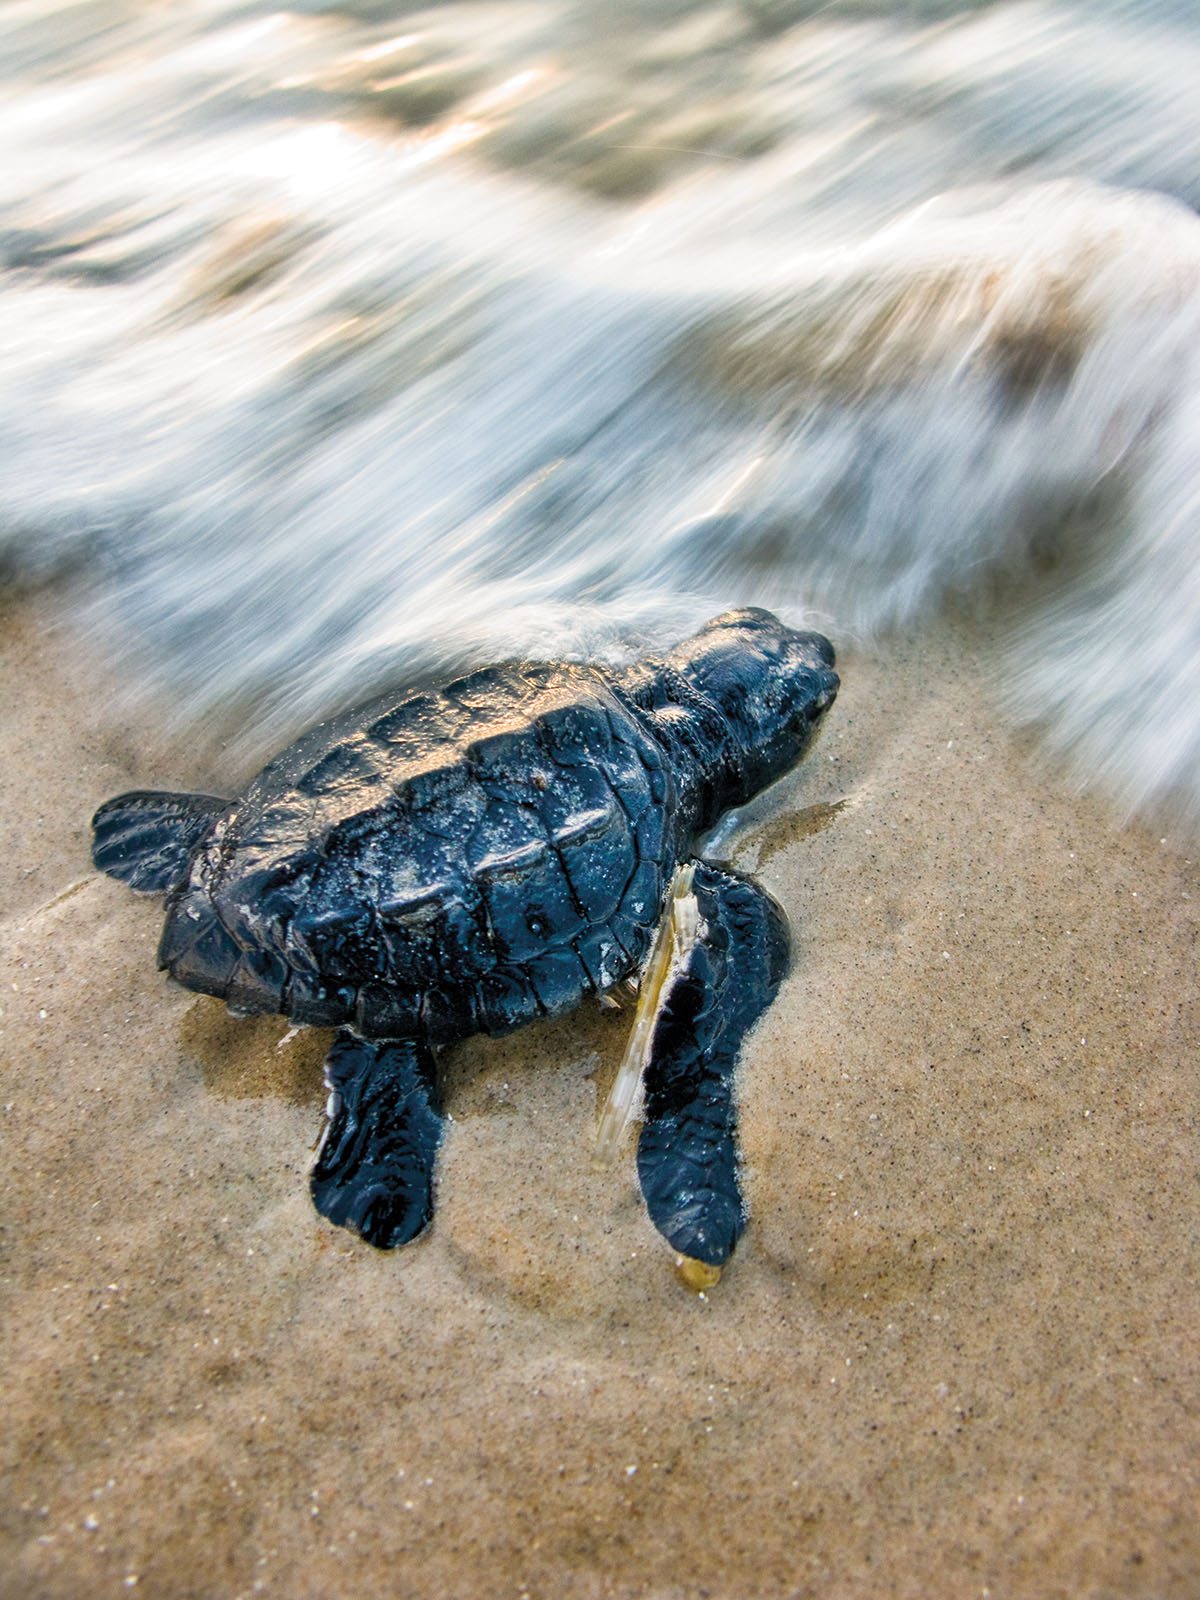 A dark turtle entering rushing water on sand